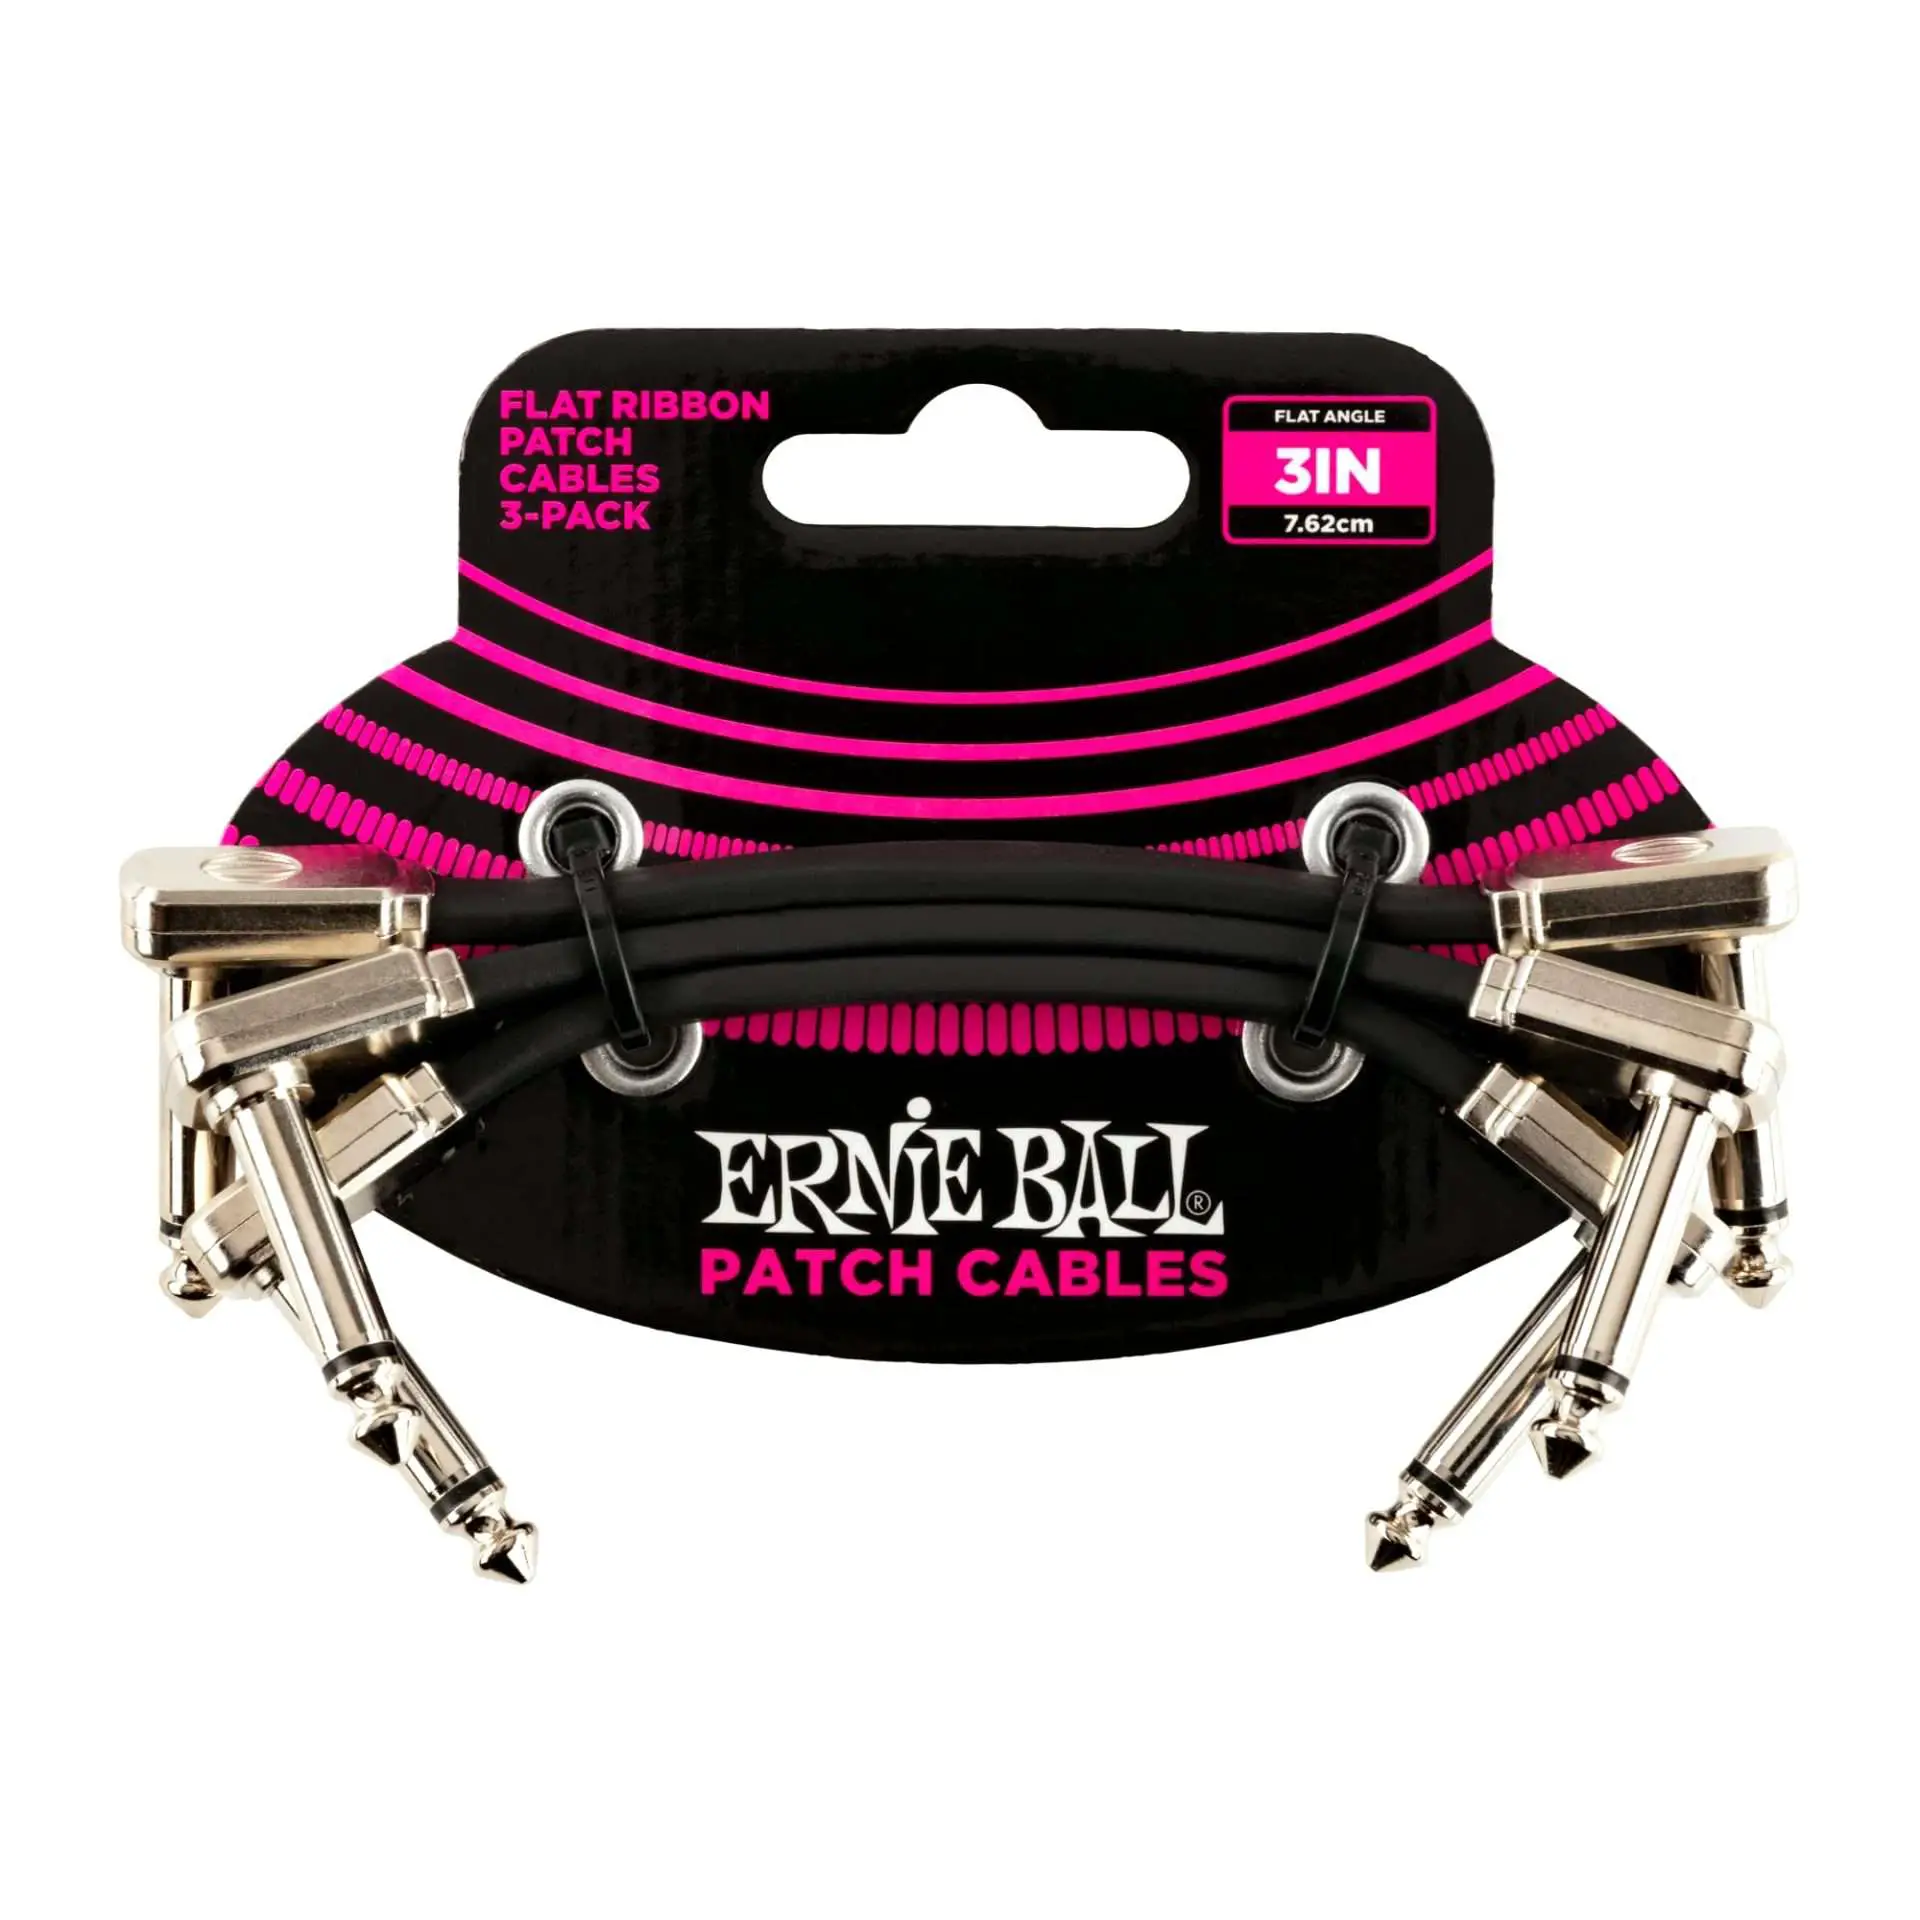 Ernie Ball Flat Ribbon Patch Cable